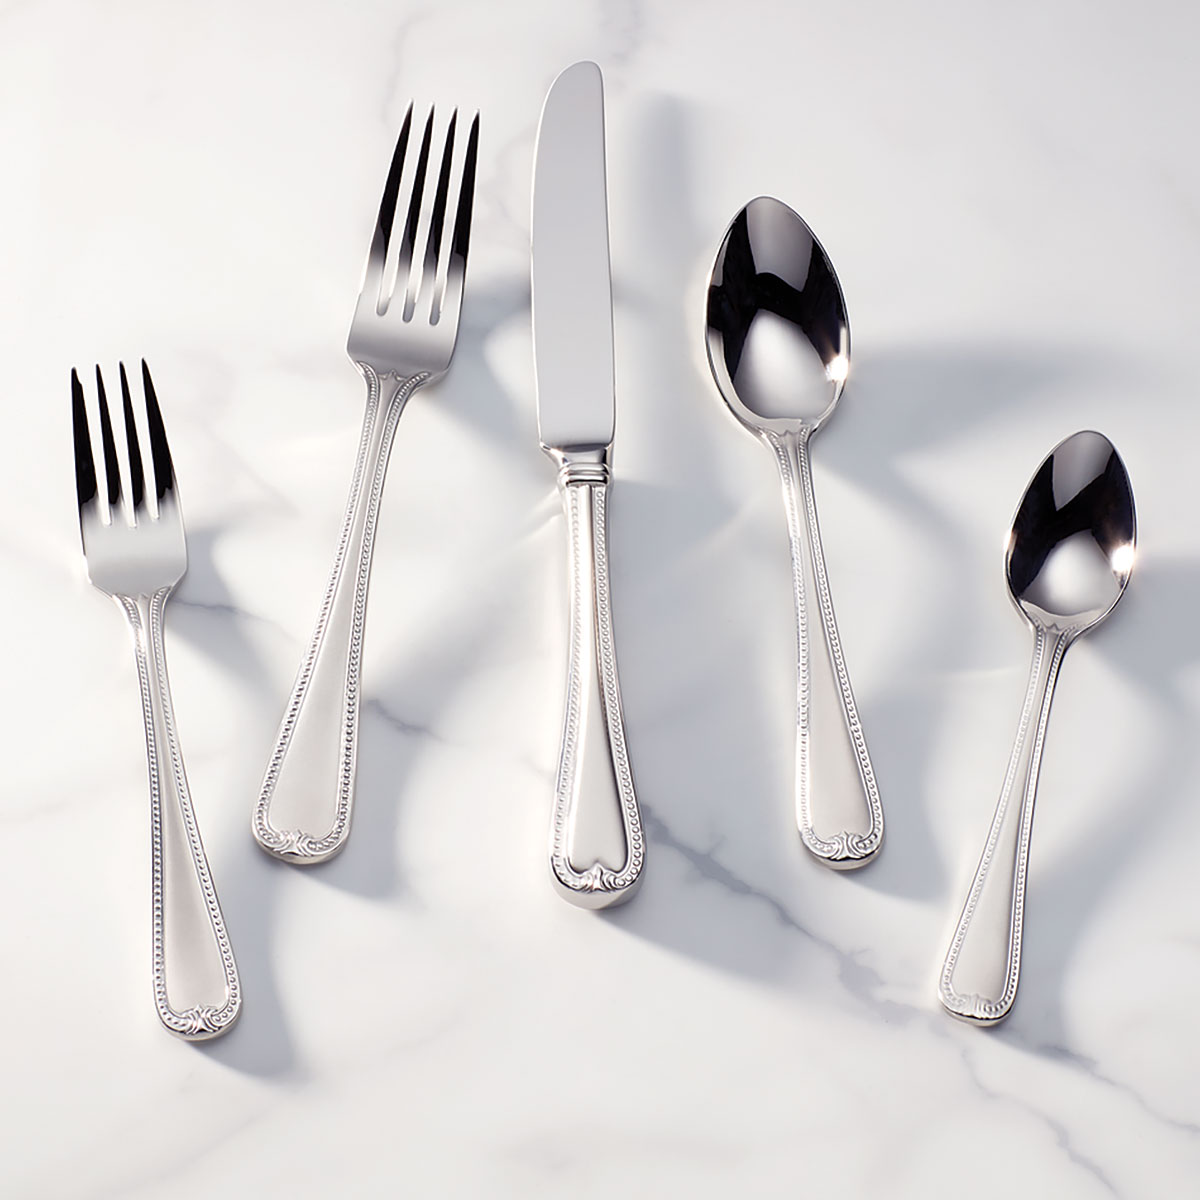 Lenox Vintage Jewel Frosted Flatware 5 Piece Place Setting